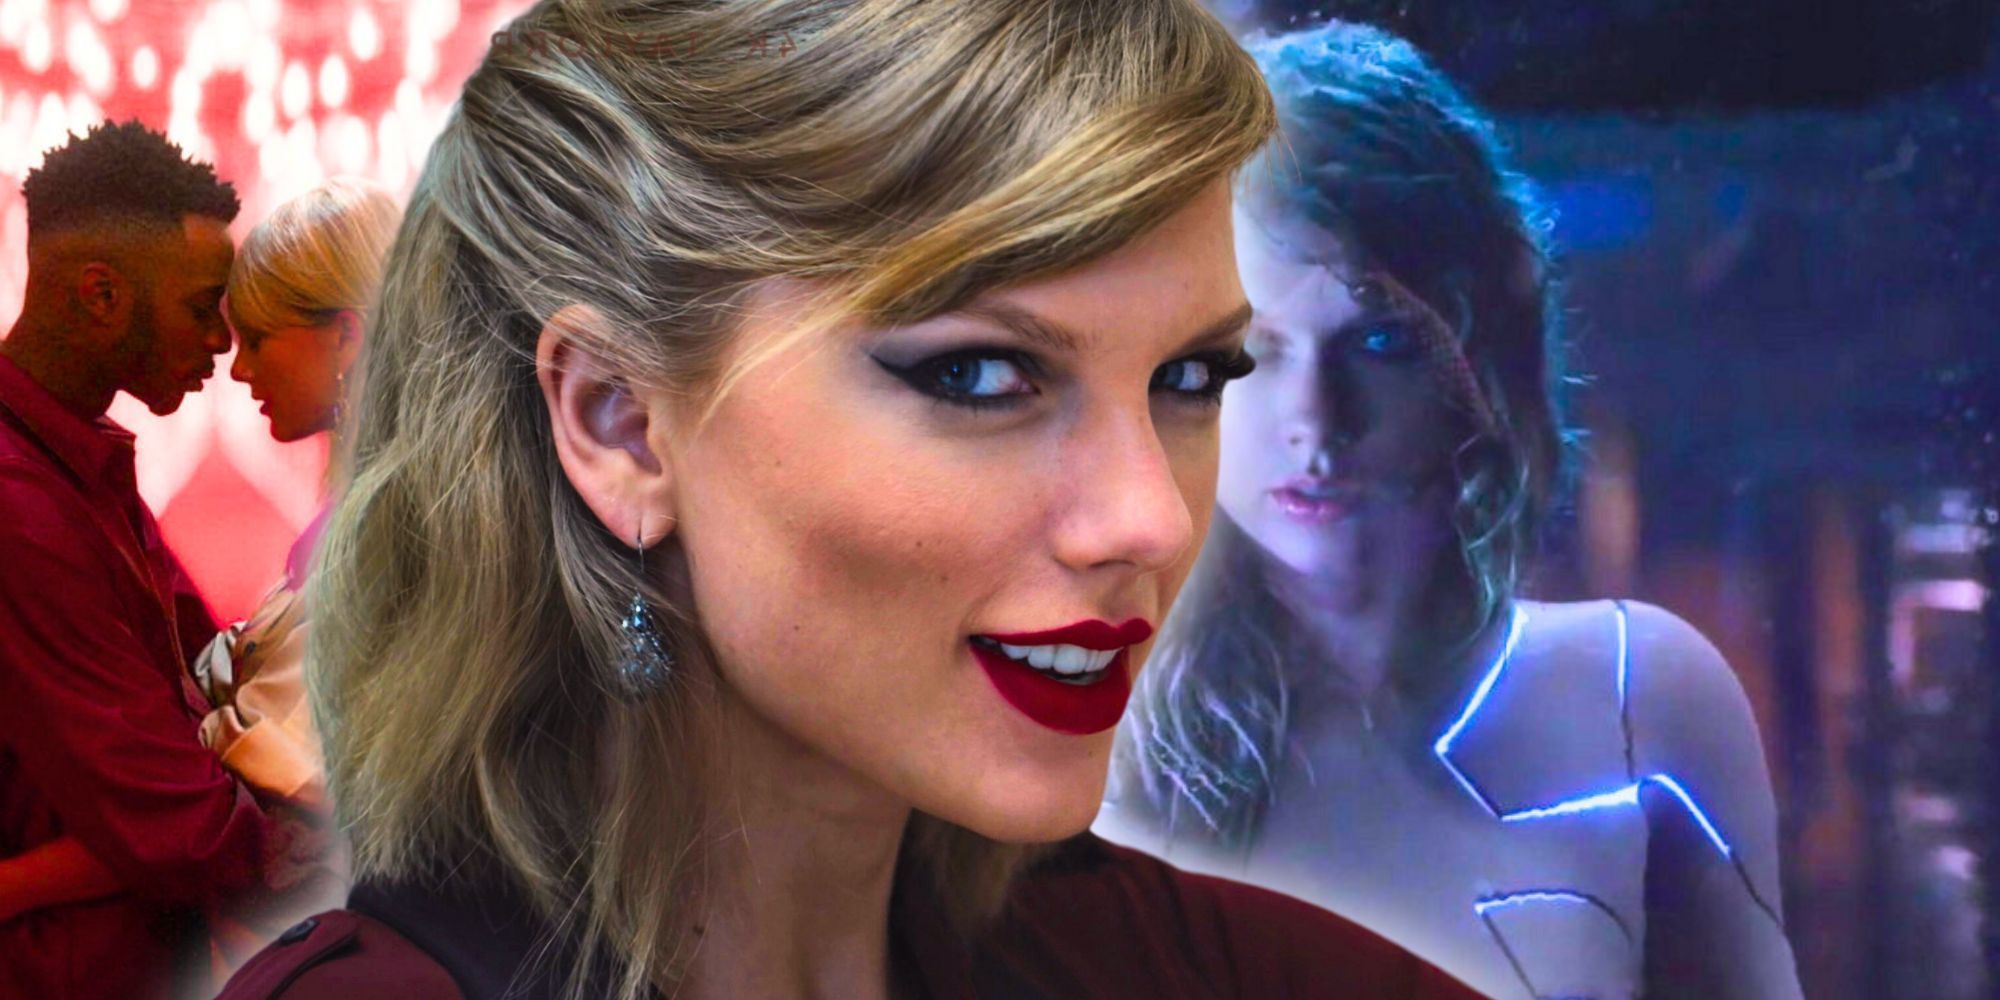 Taylor Swift music videos collage feat. Lover, Blank Space, and ...Ready For It?